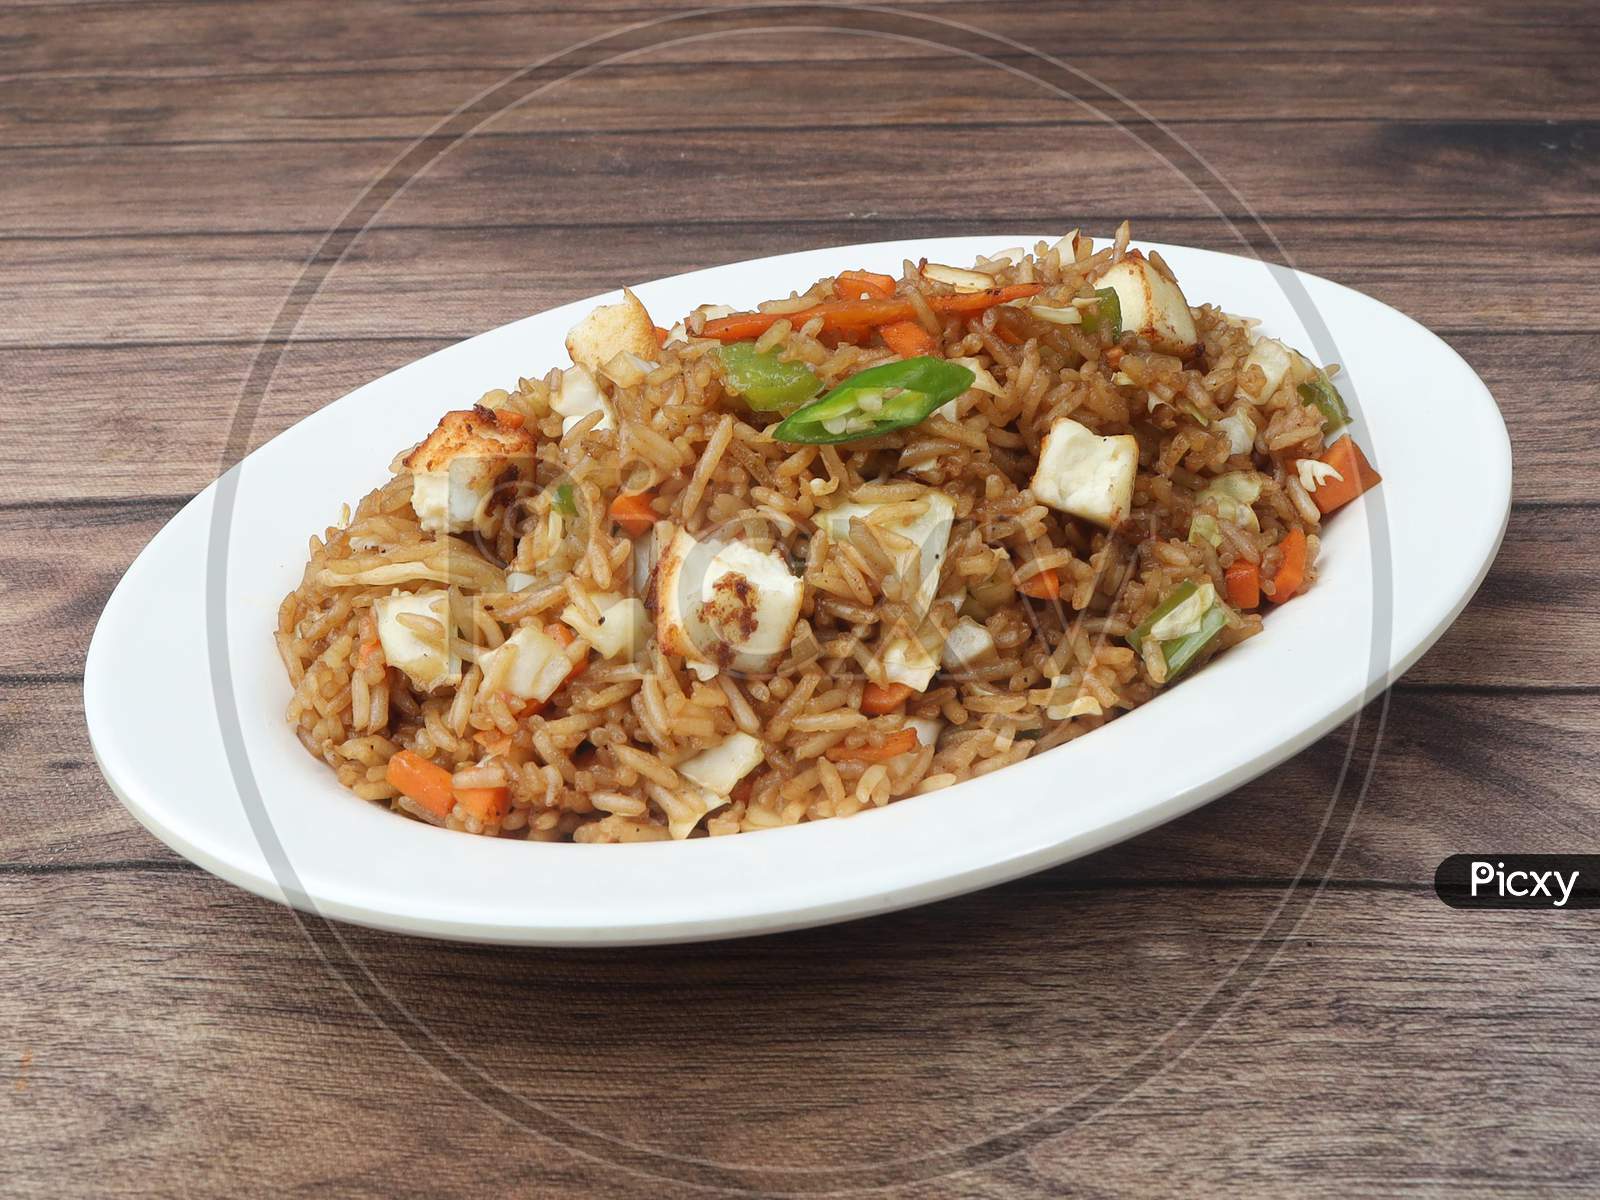 Healthy And Tasty Paneer Fried Rice Made Of Rice, Mixed Veggies And Paneer, Served In Bowl Over A Rustic Wooden Background, Indo Chinese, Indian Cuisine, Selective Focus